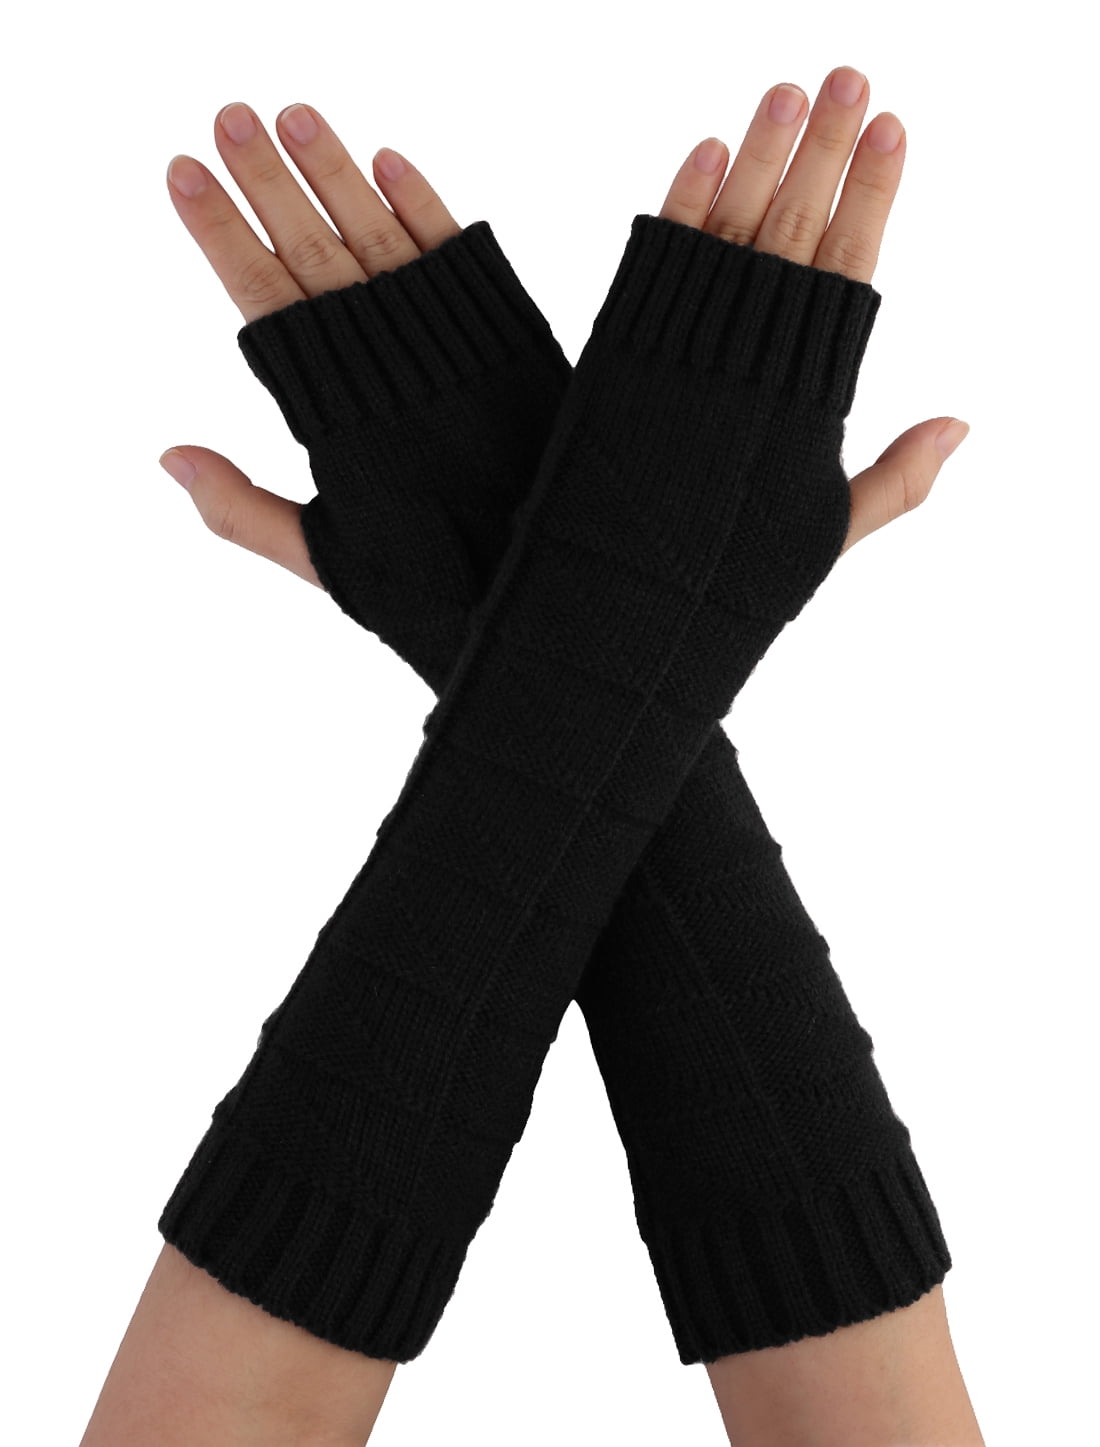 Flammi Womens 2 Pairs Cable Knit Arm Warmers Fingerless Gloves Thumb Hole Gloves Mittens 